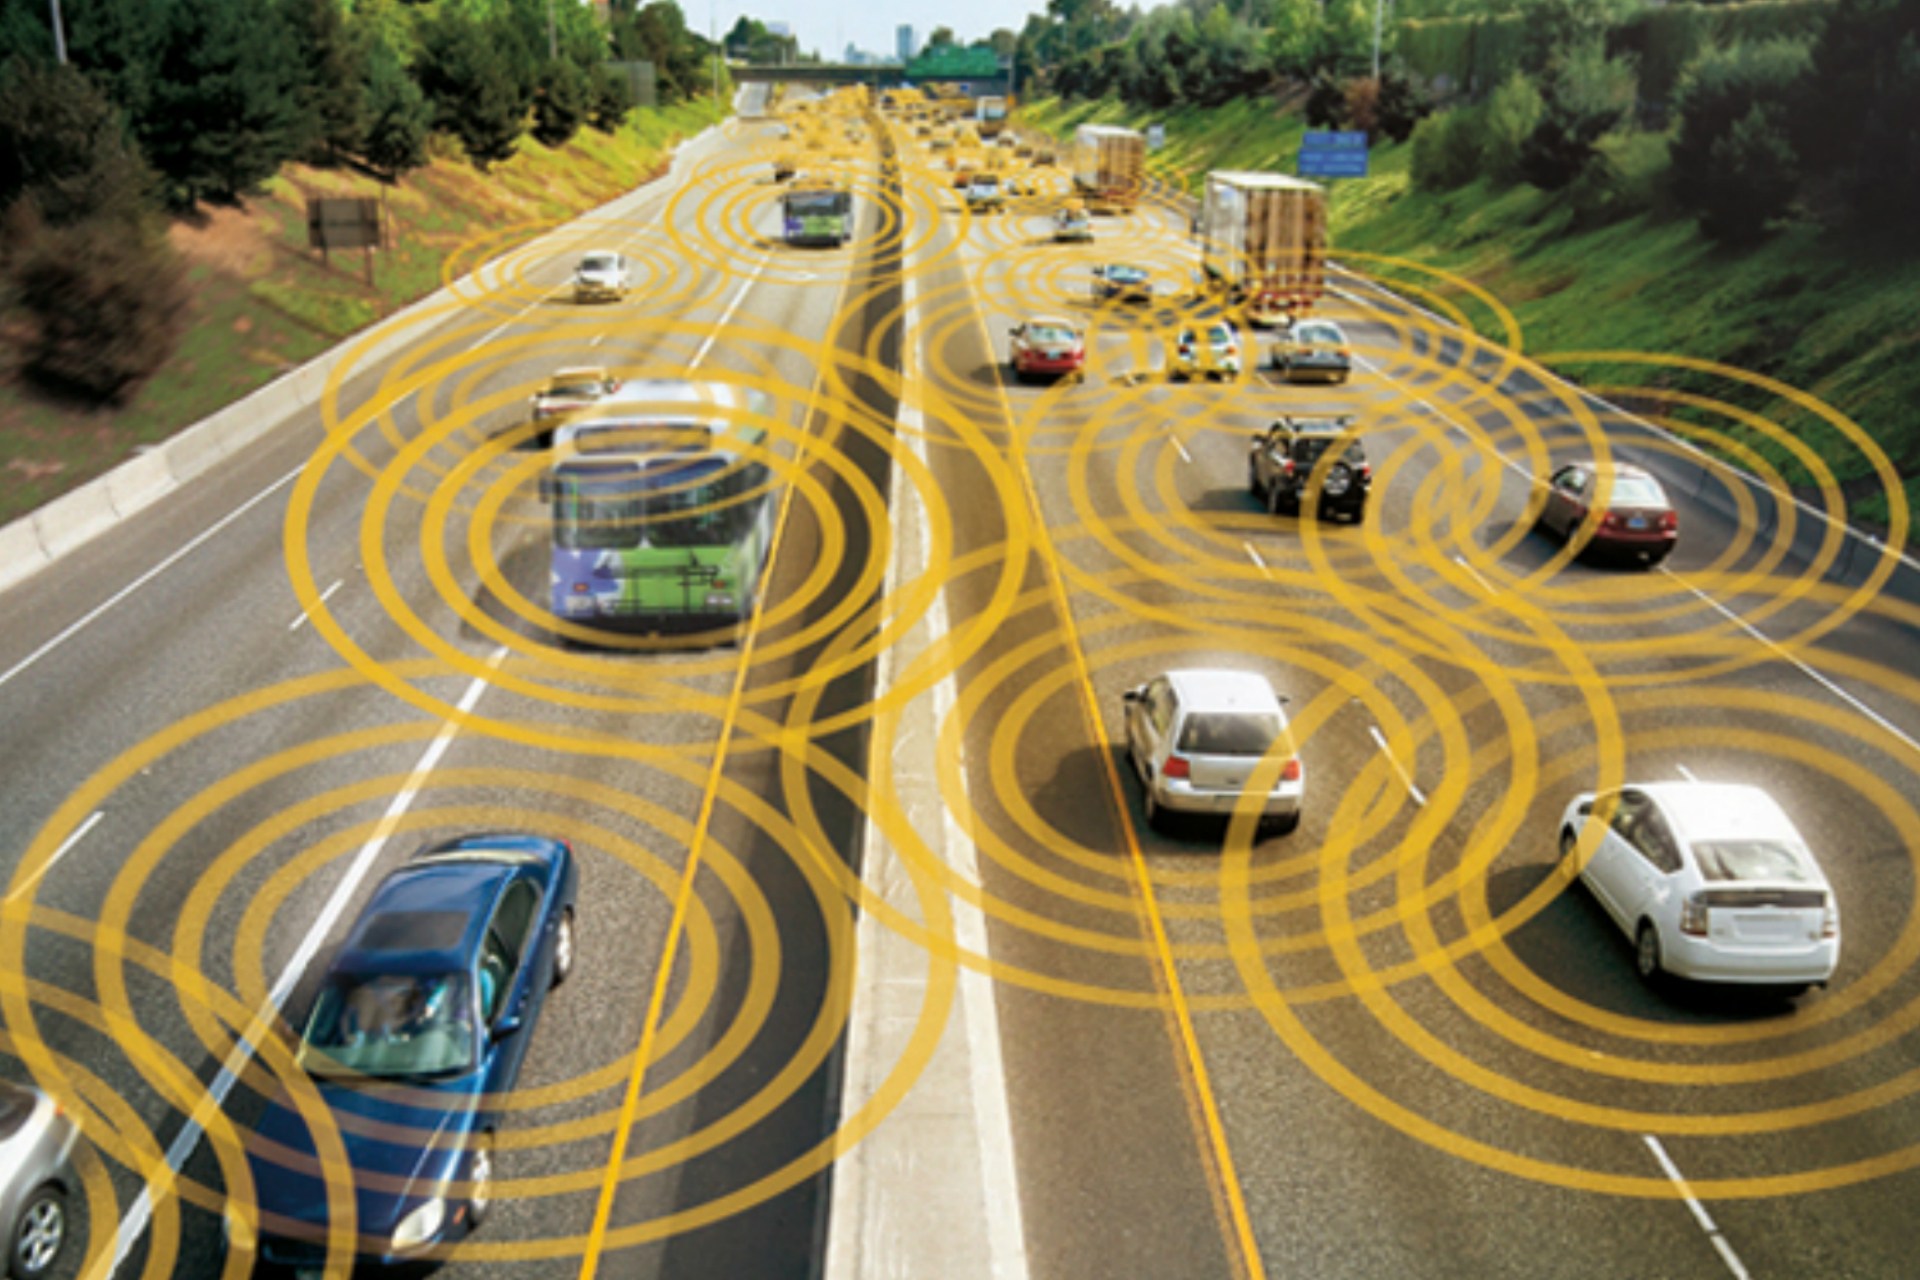 rtificial intelligence: The future of autonomous driving